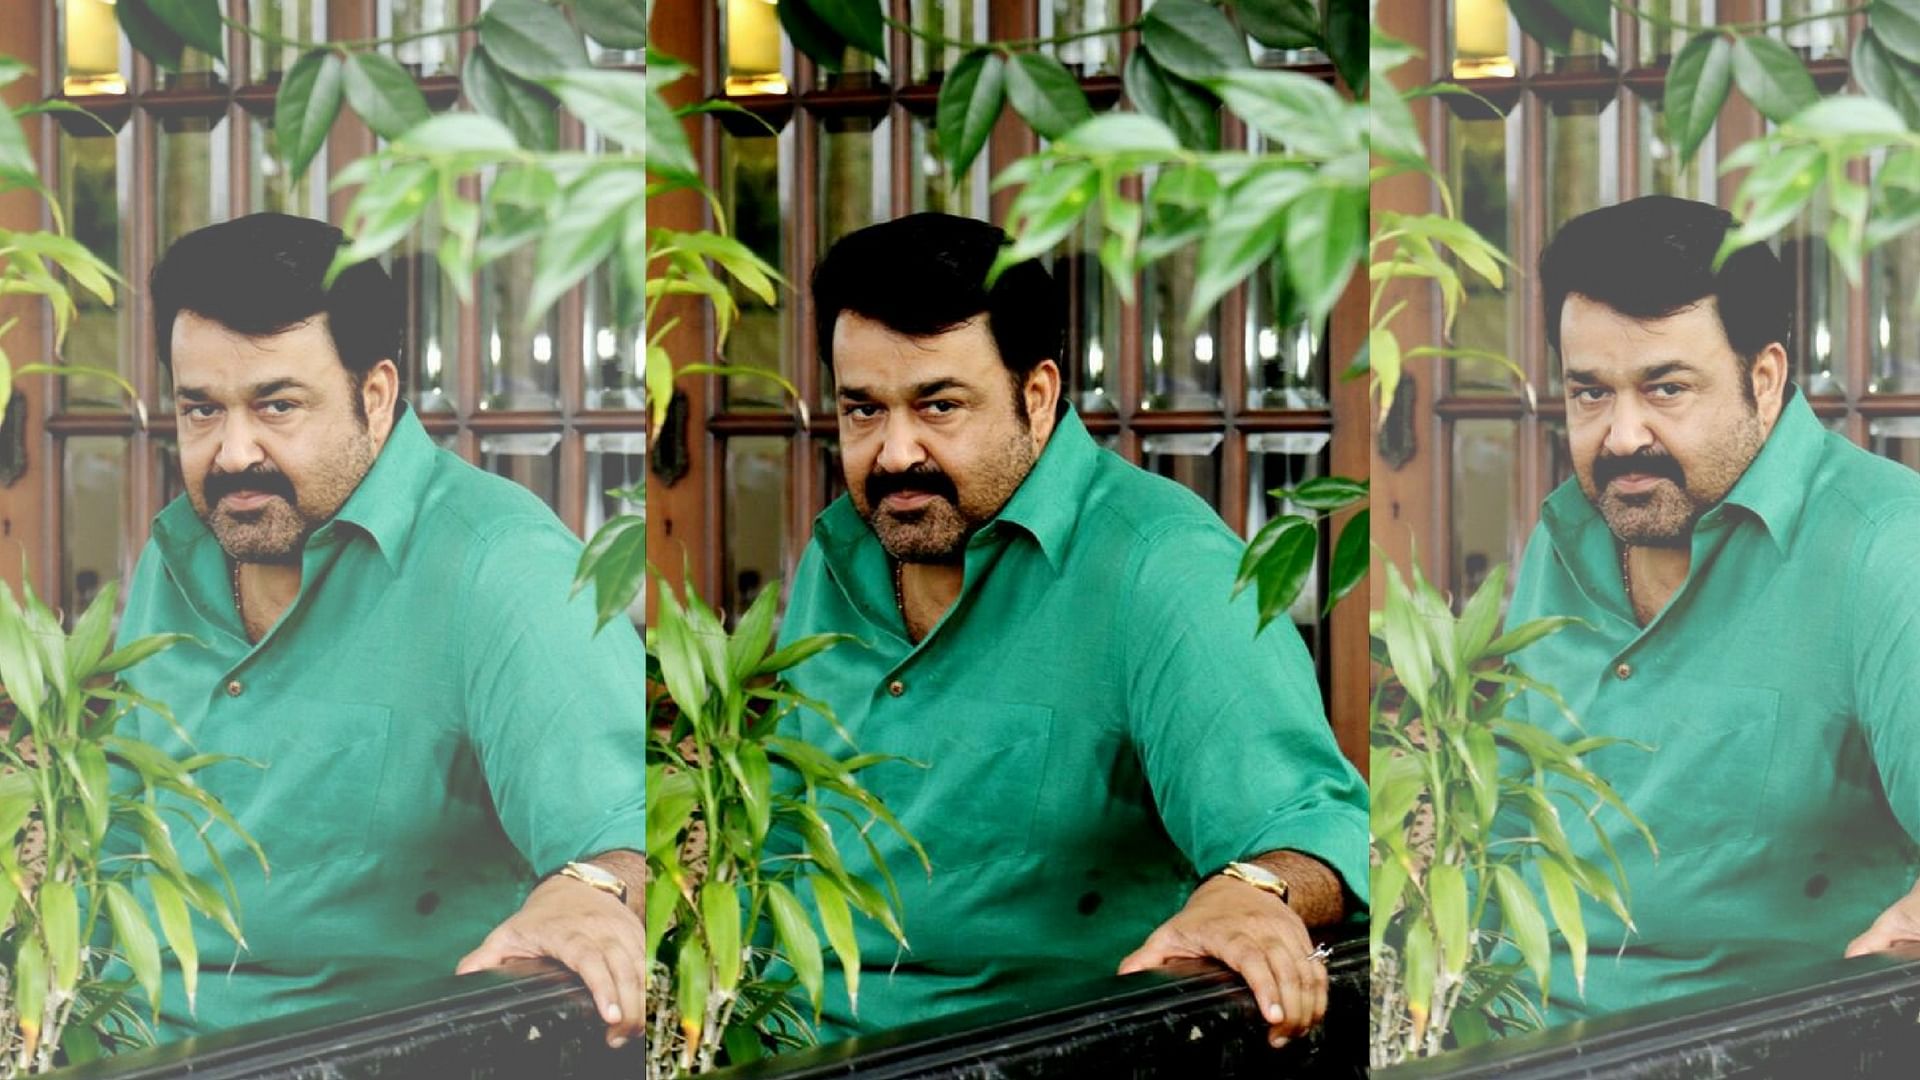 Mohanlal is ready to take on the role of a lifetime. (Photo courtesy: <a href="https://www.facebook.com/ActorMohanlal/photos/a.367995736589462.86564.365947683460934/1184461238276237/?type=3&amp;theater">Facebook/ Mohanlal</a>)